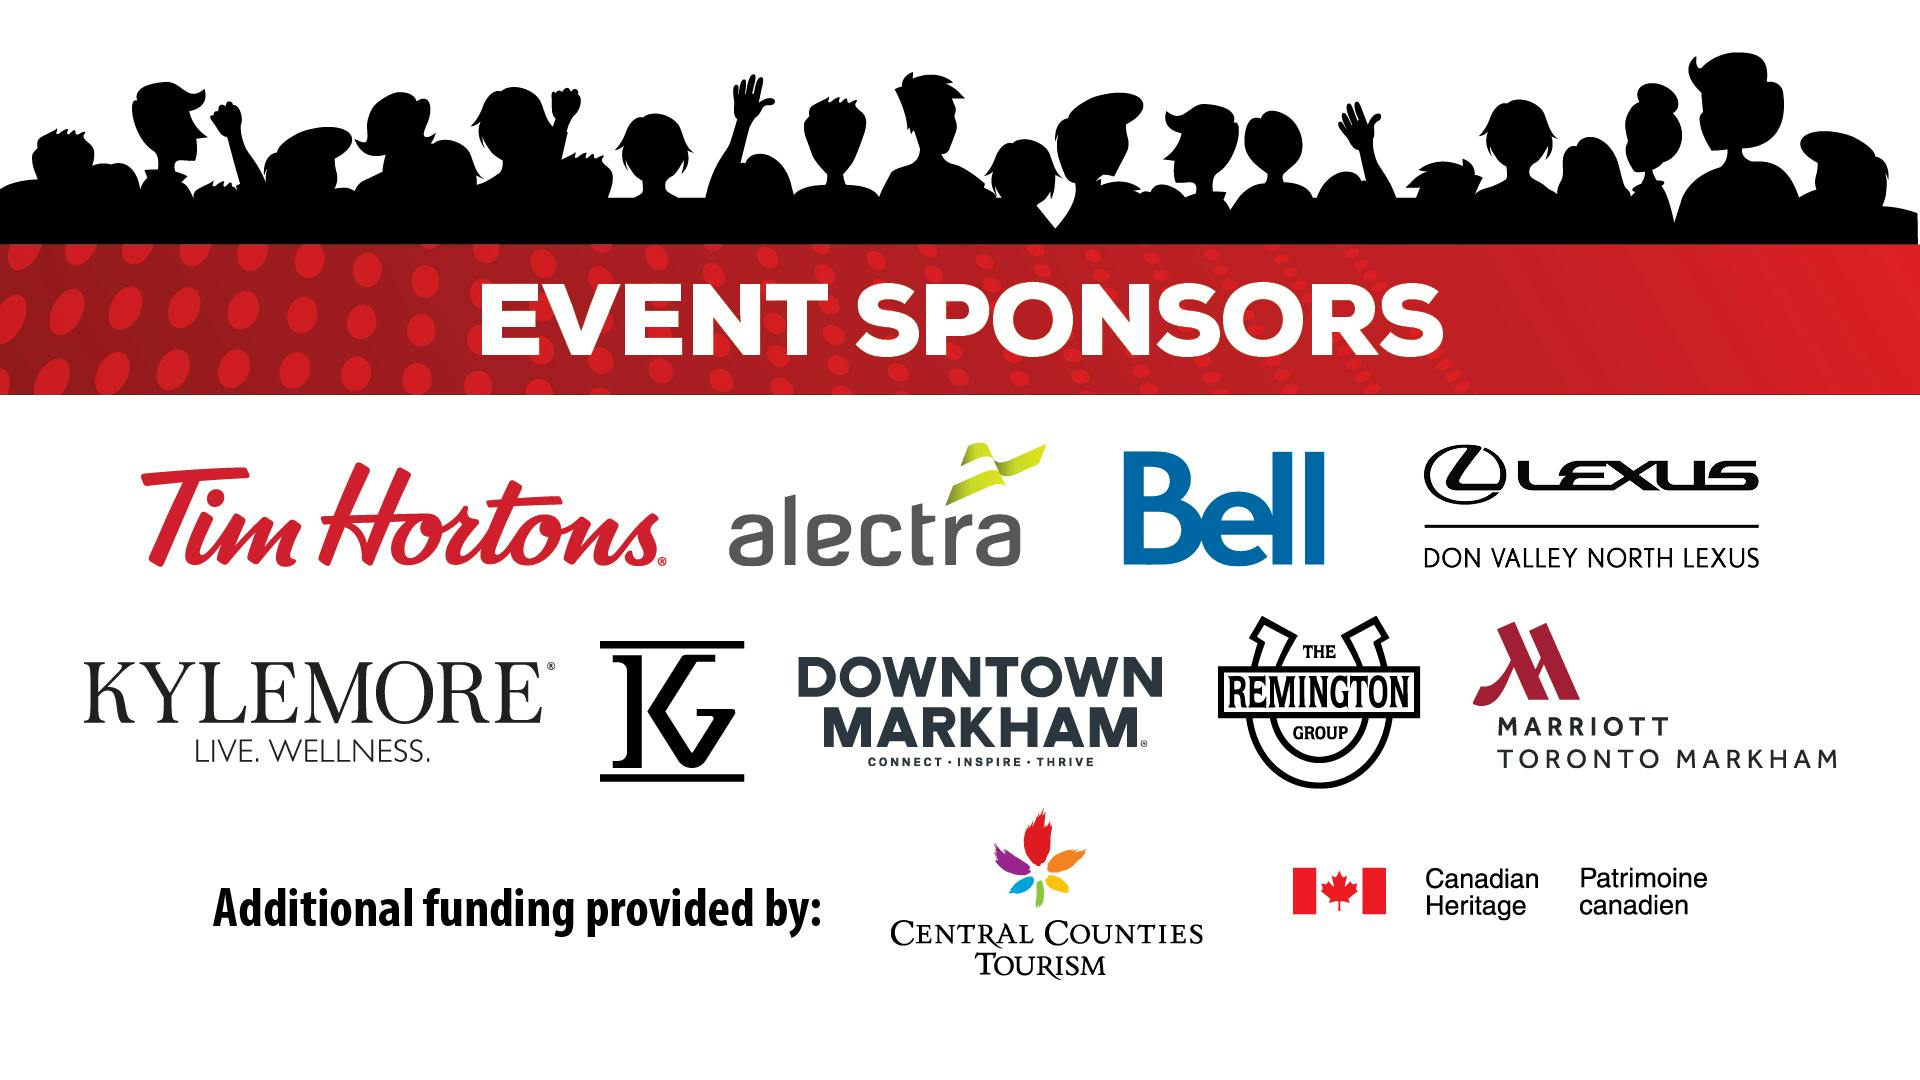 Event Sponsors include Tim Hortons, Alectra, Bell, Don Valley North Lexus, Kylemore, Kerbel, Downtown Markham, Remington and Marriott Toronto. Additional funding provided by Central Counties Tourism and Heritage Canada.